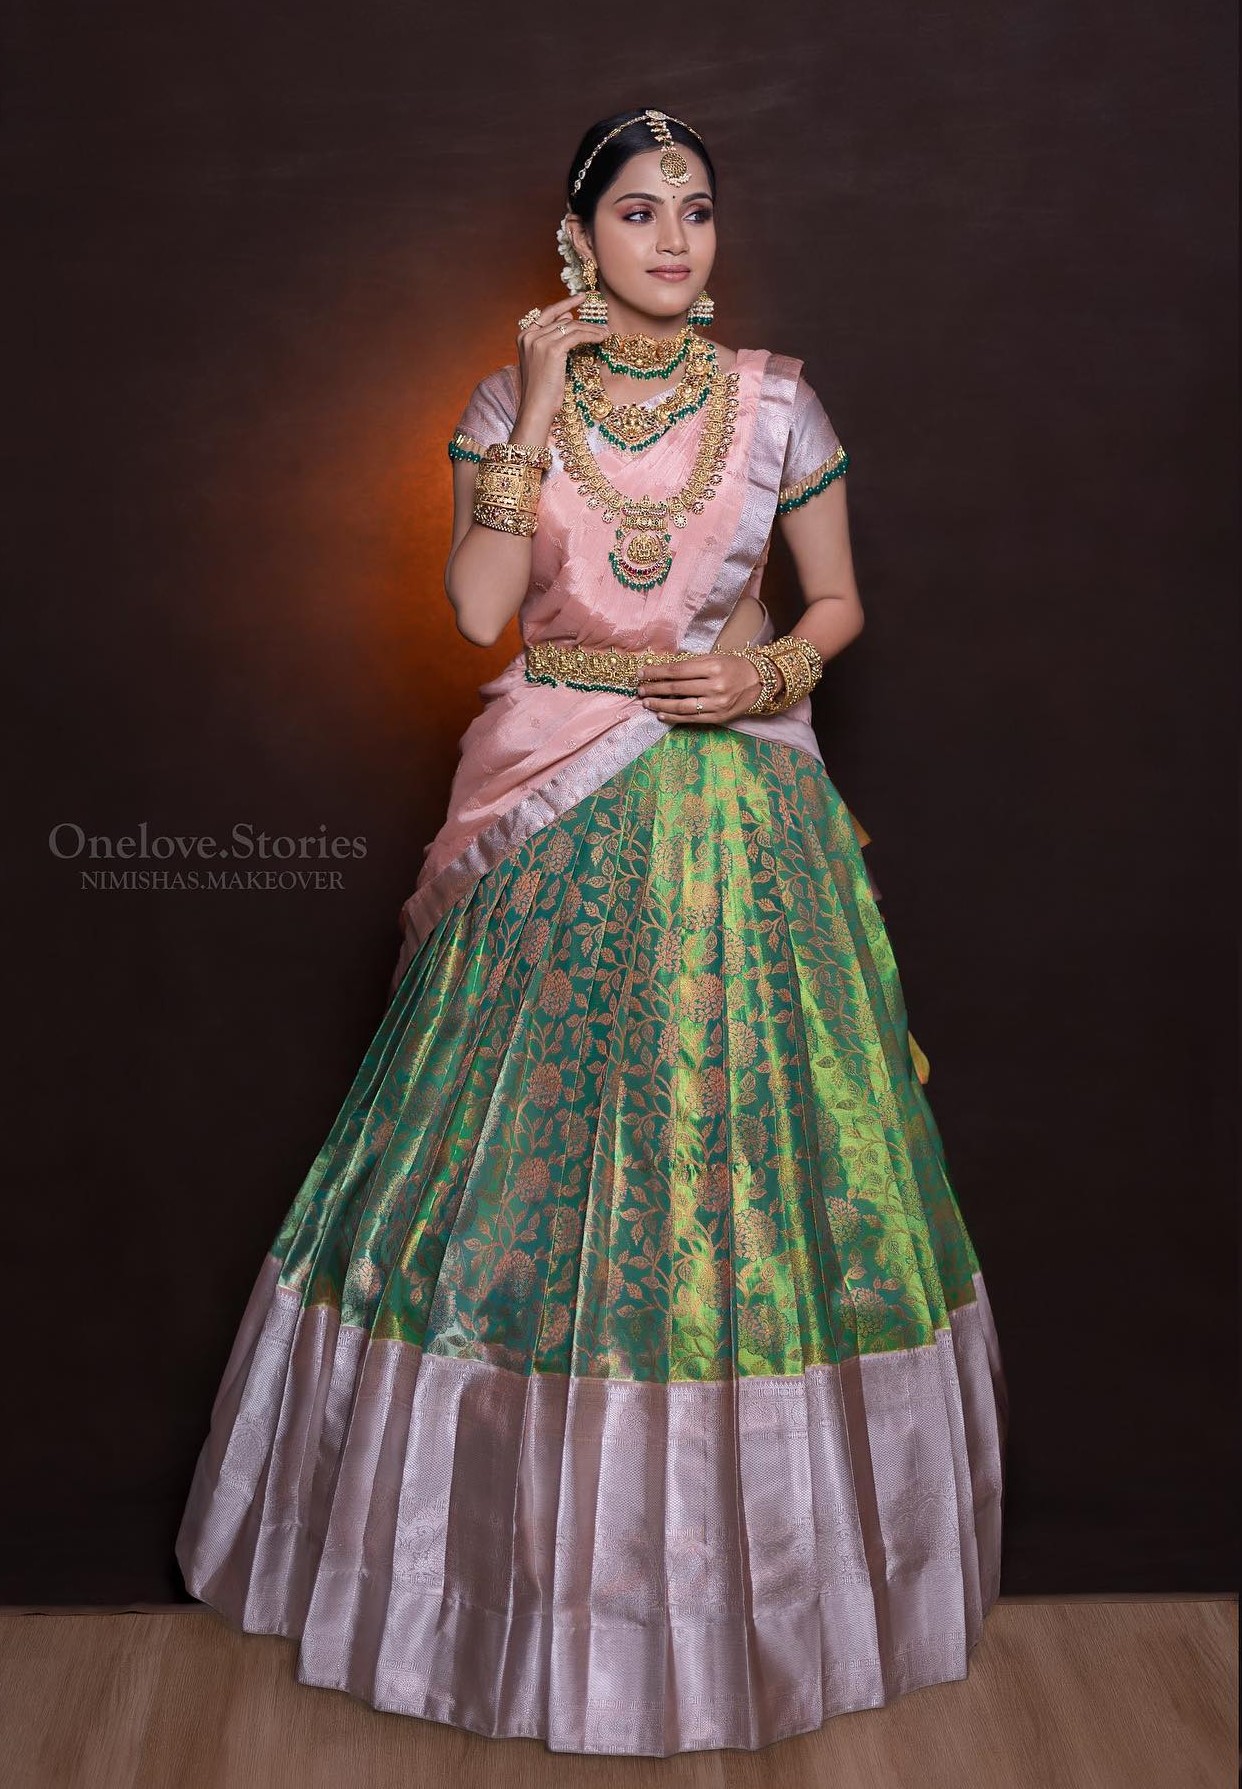 Vaishali Thaniga Set New Trend By Ditching Traditional Red Lehenga & Wearing Pink & Green Brocade Lehenga With Dedicated Bridal Outfits And Looks 